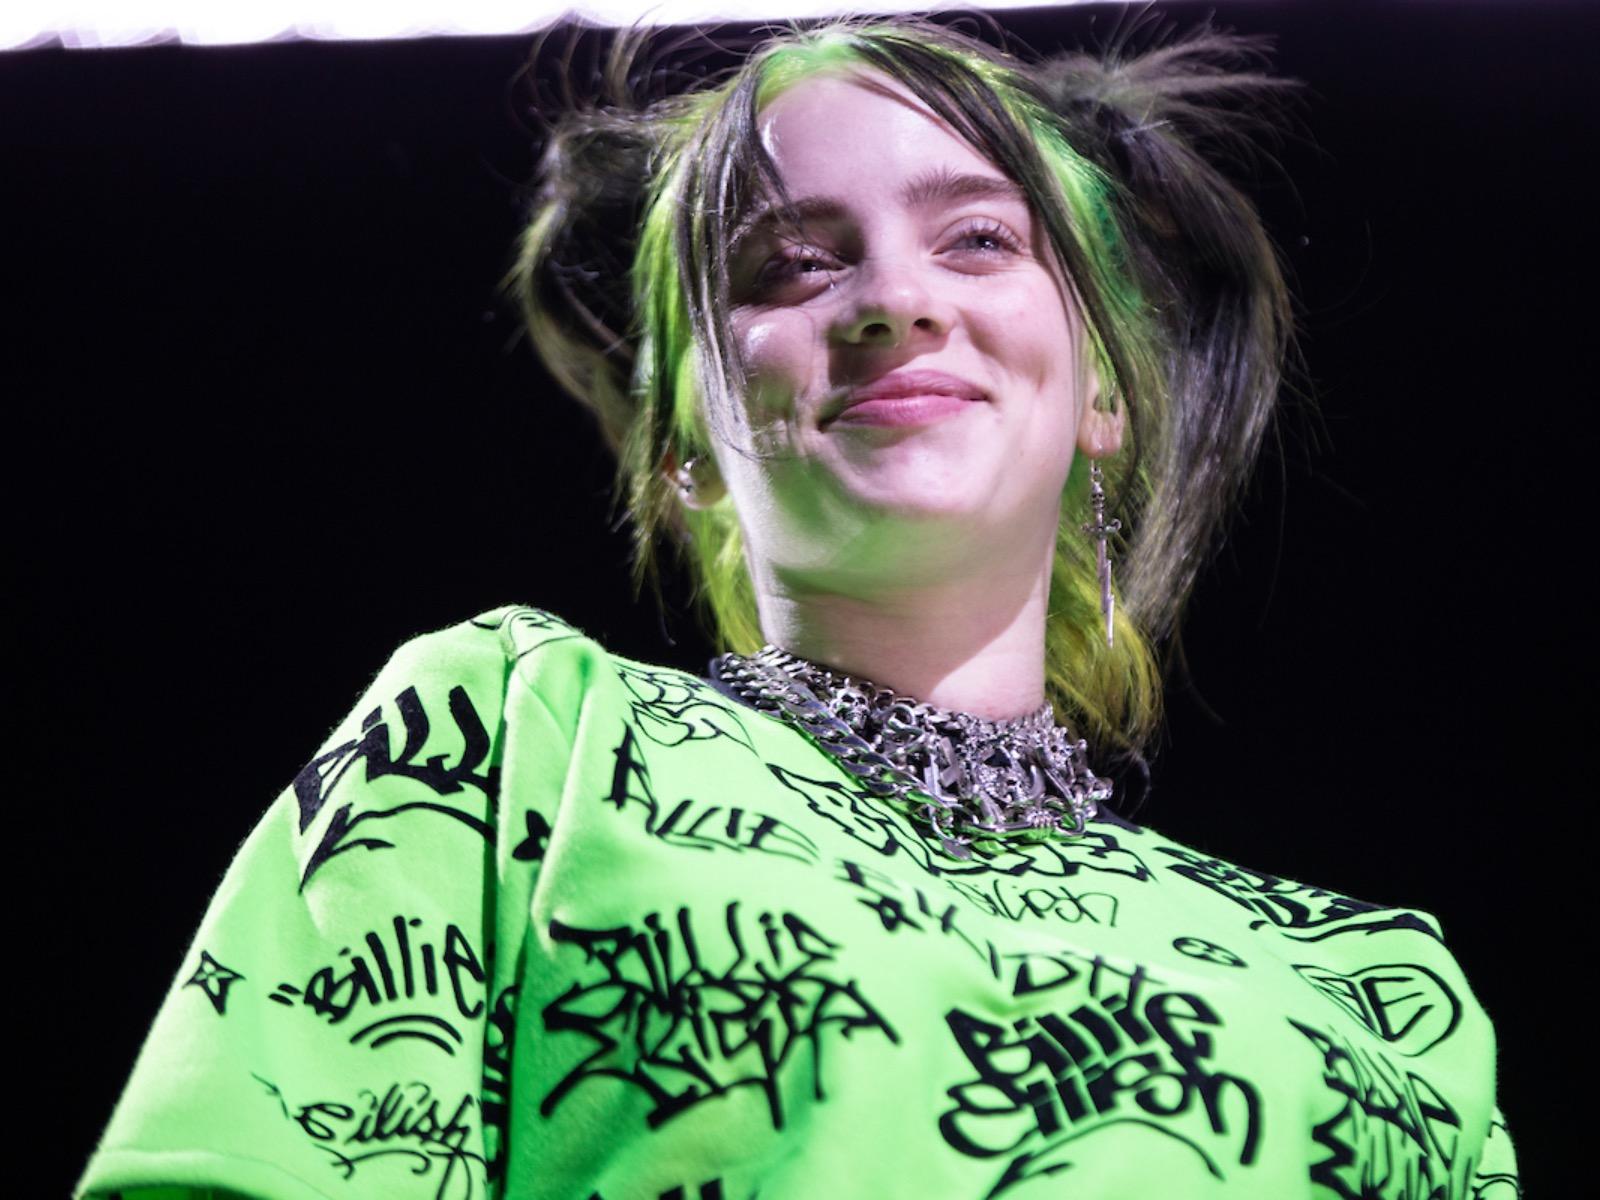 Sickness couldn't stop rising star Billie Eilish from stunning at